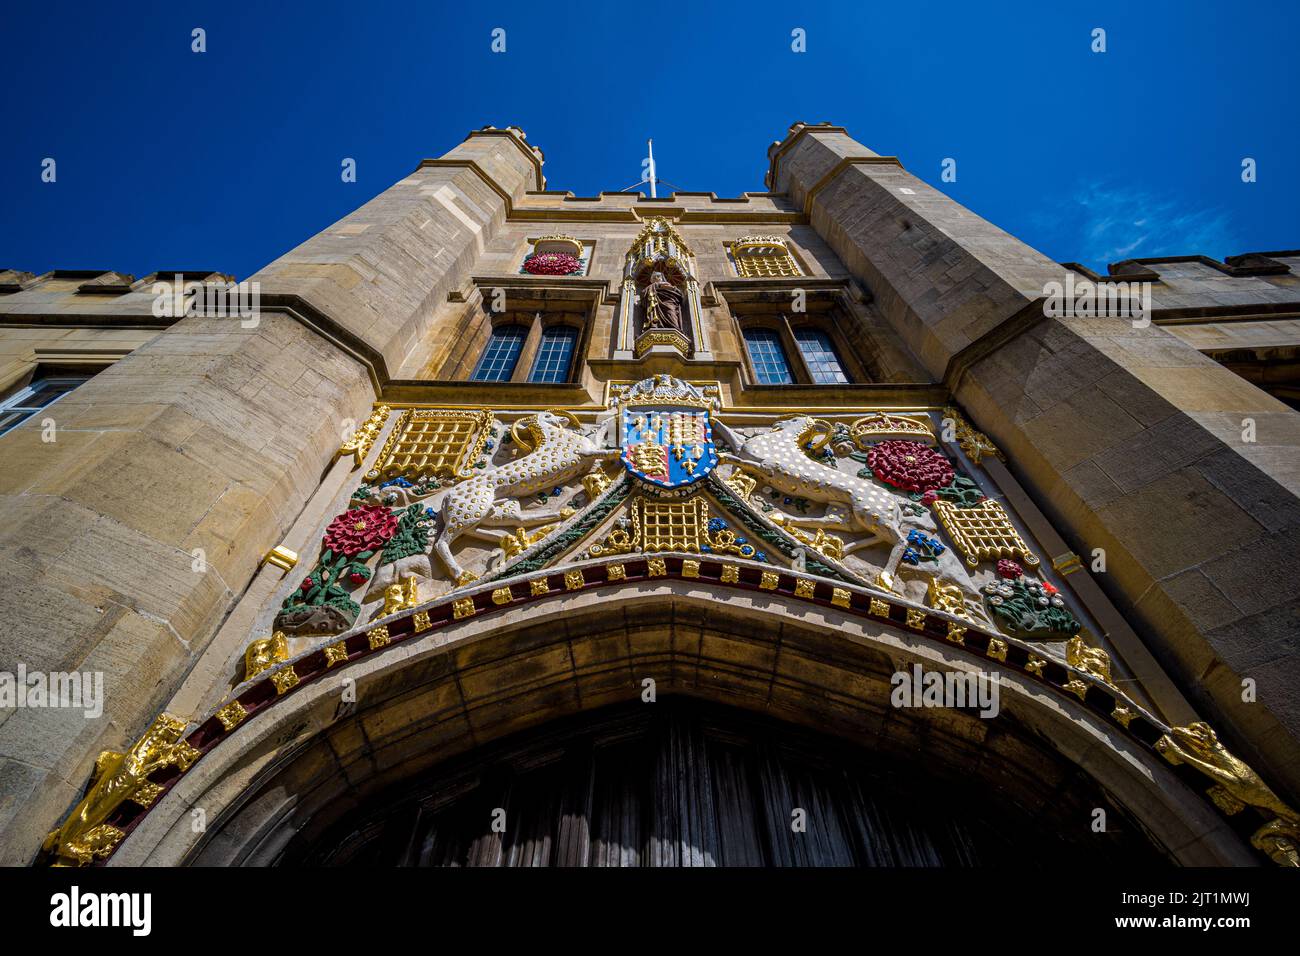 Christs College Cambridge - the refurbished front gate of Christs College, part of the University of Cambridge, established 1446 as God's House Stock Photo